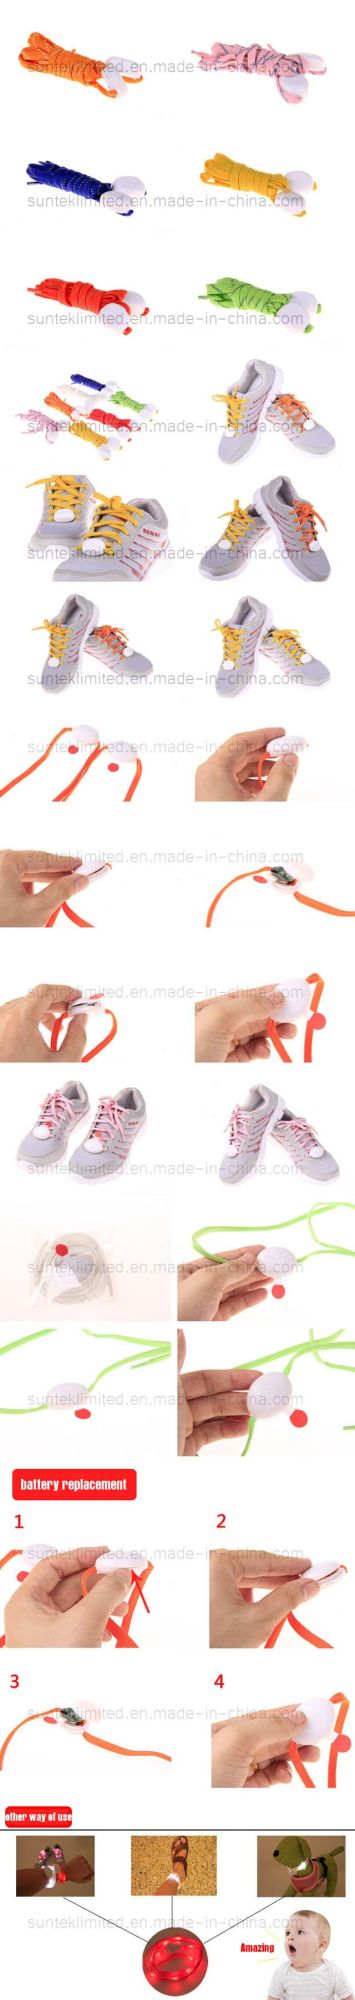 Custom Light up Glowing Party LED Glowing Shoelace for Promotion